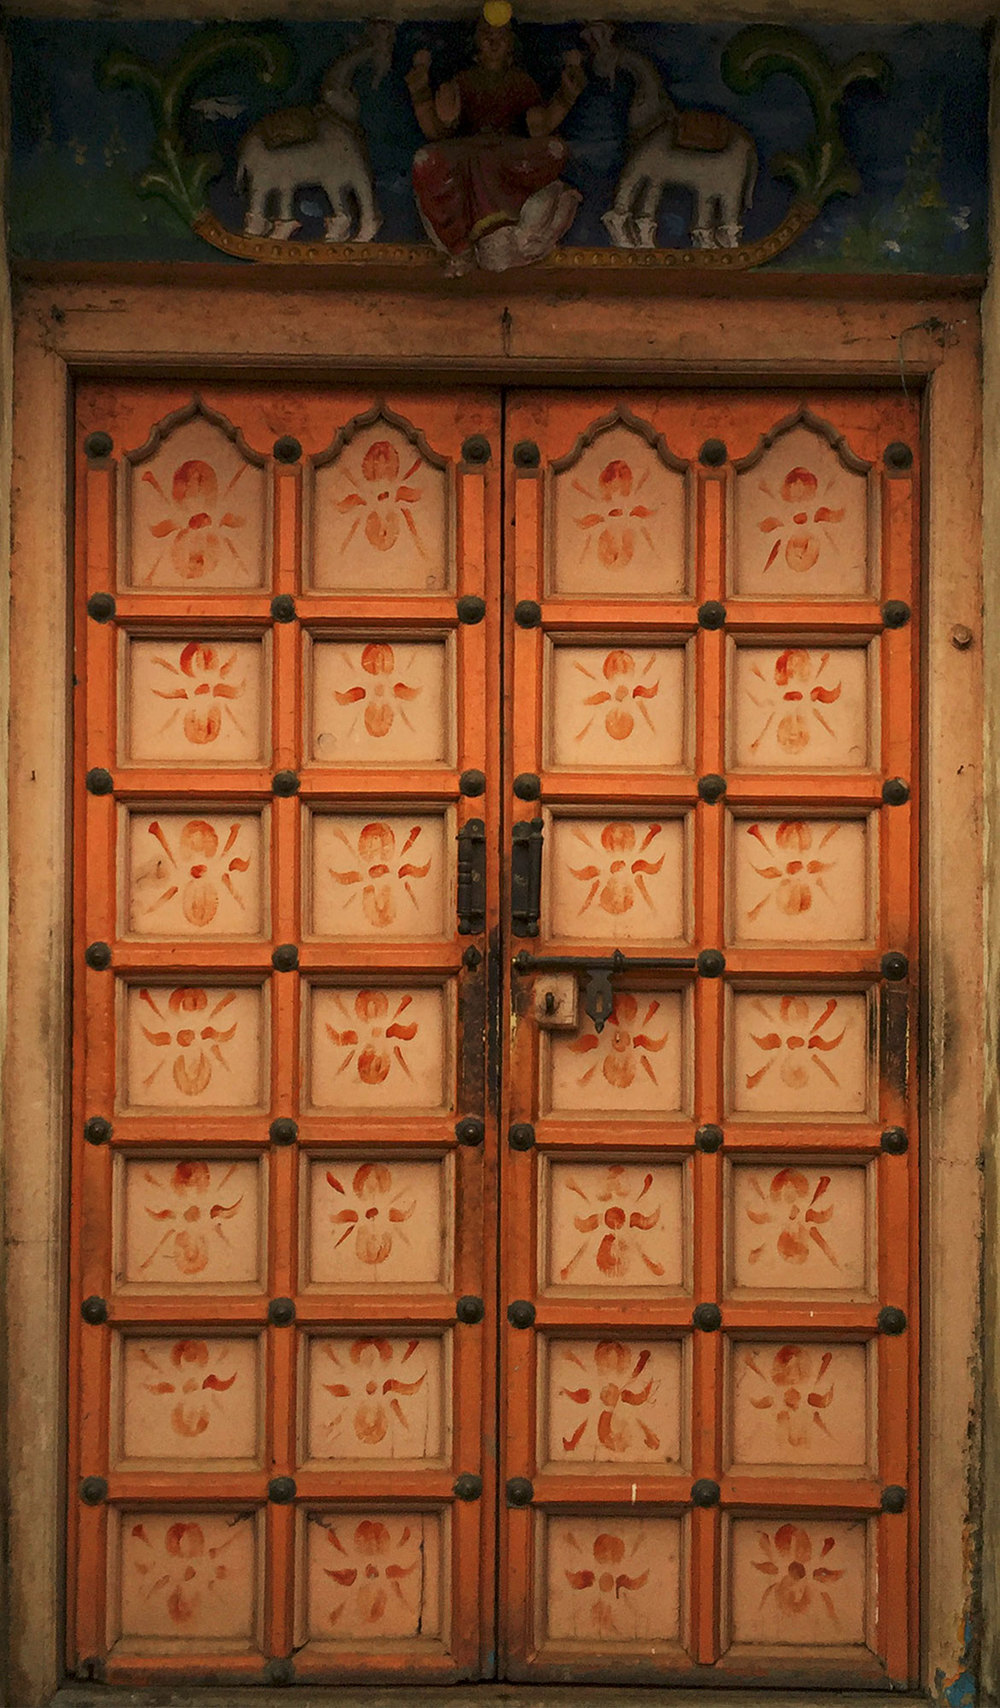 Detail of the doors of the little Krishna temple.  Love the pattern.